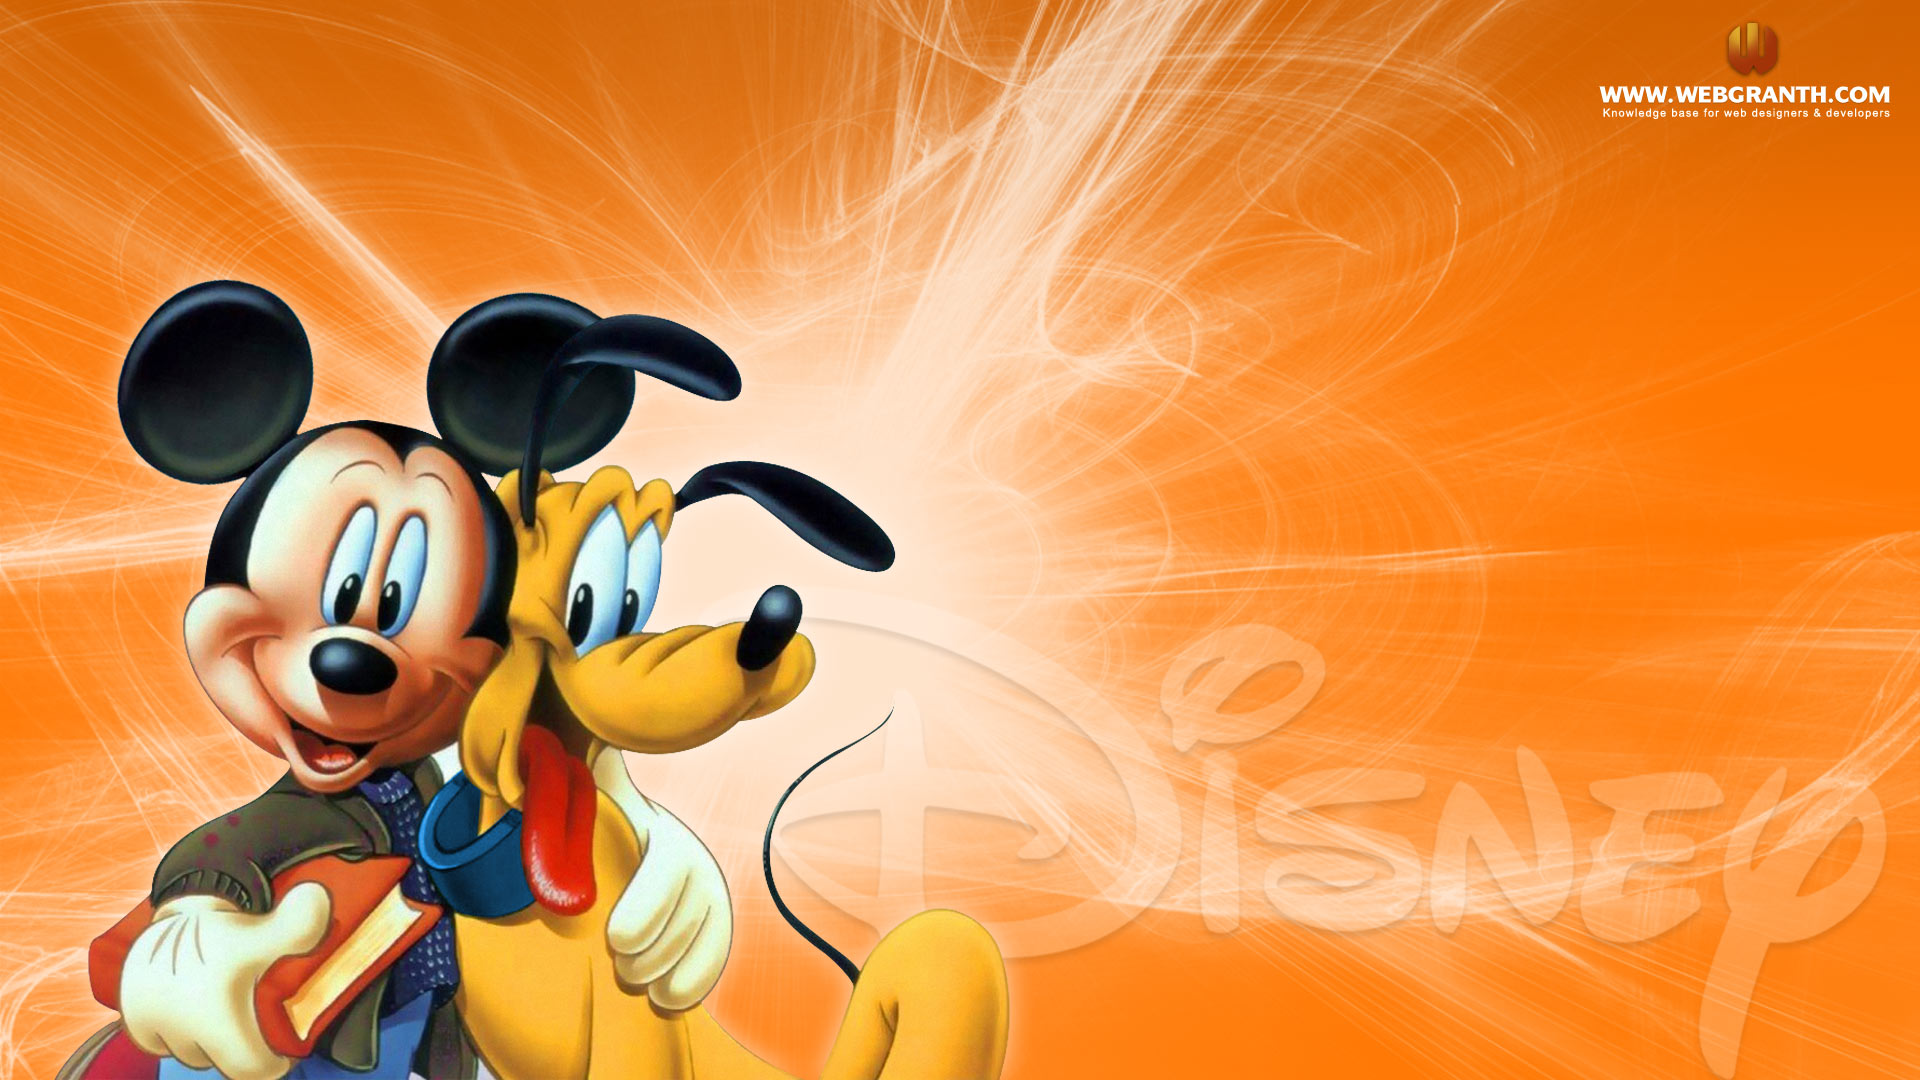 Disney Mickey Mouse And Pluto Wallpaper Hd Widescreen Free Download :  